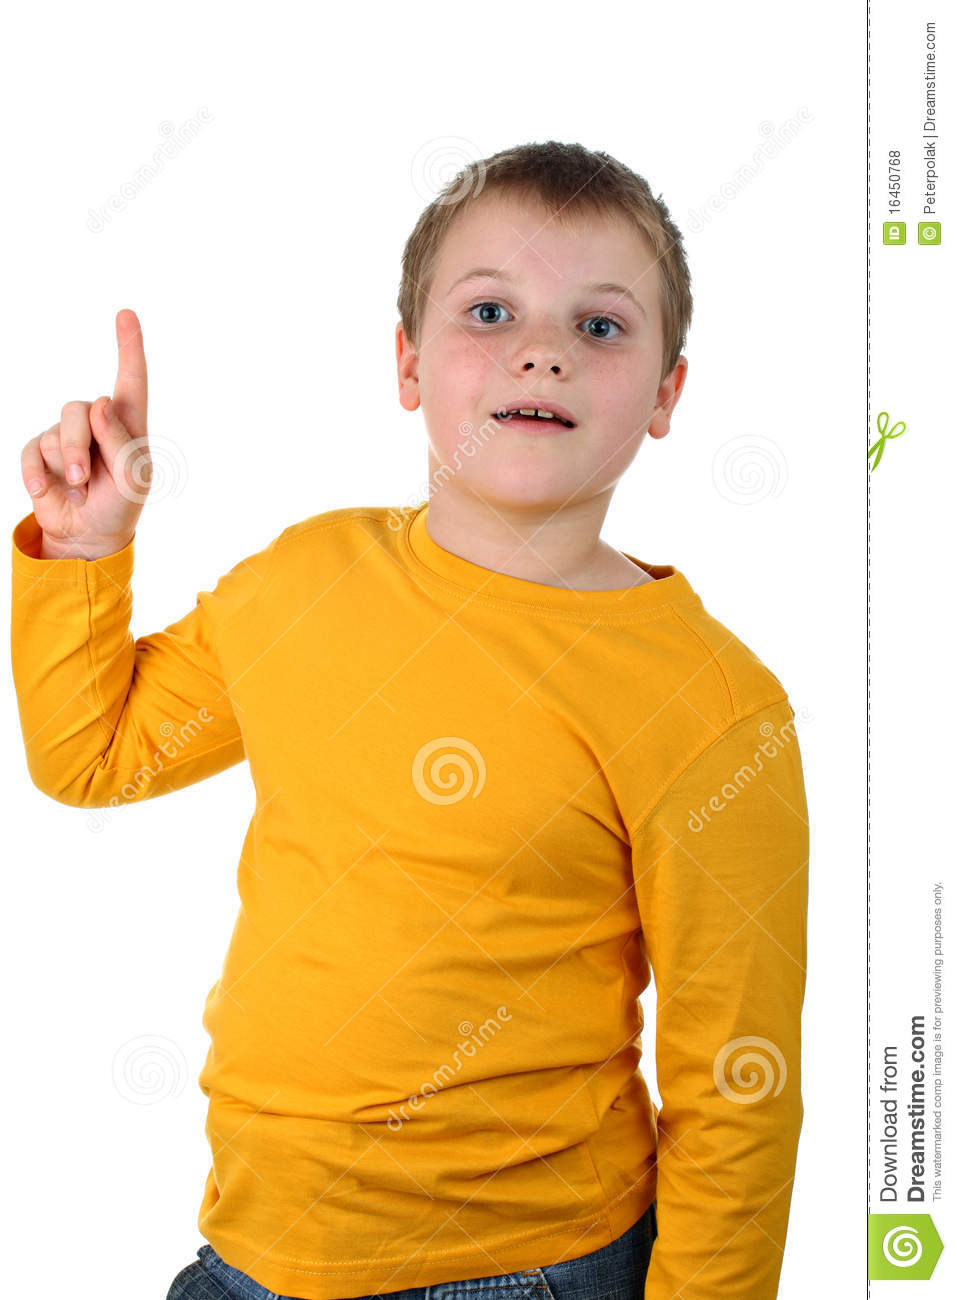 Portraits Of A Preteen Boy Wearing Yellow Top Both His Index Finger